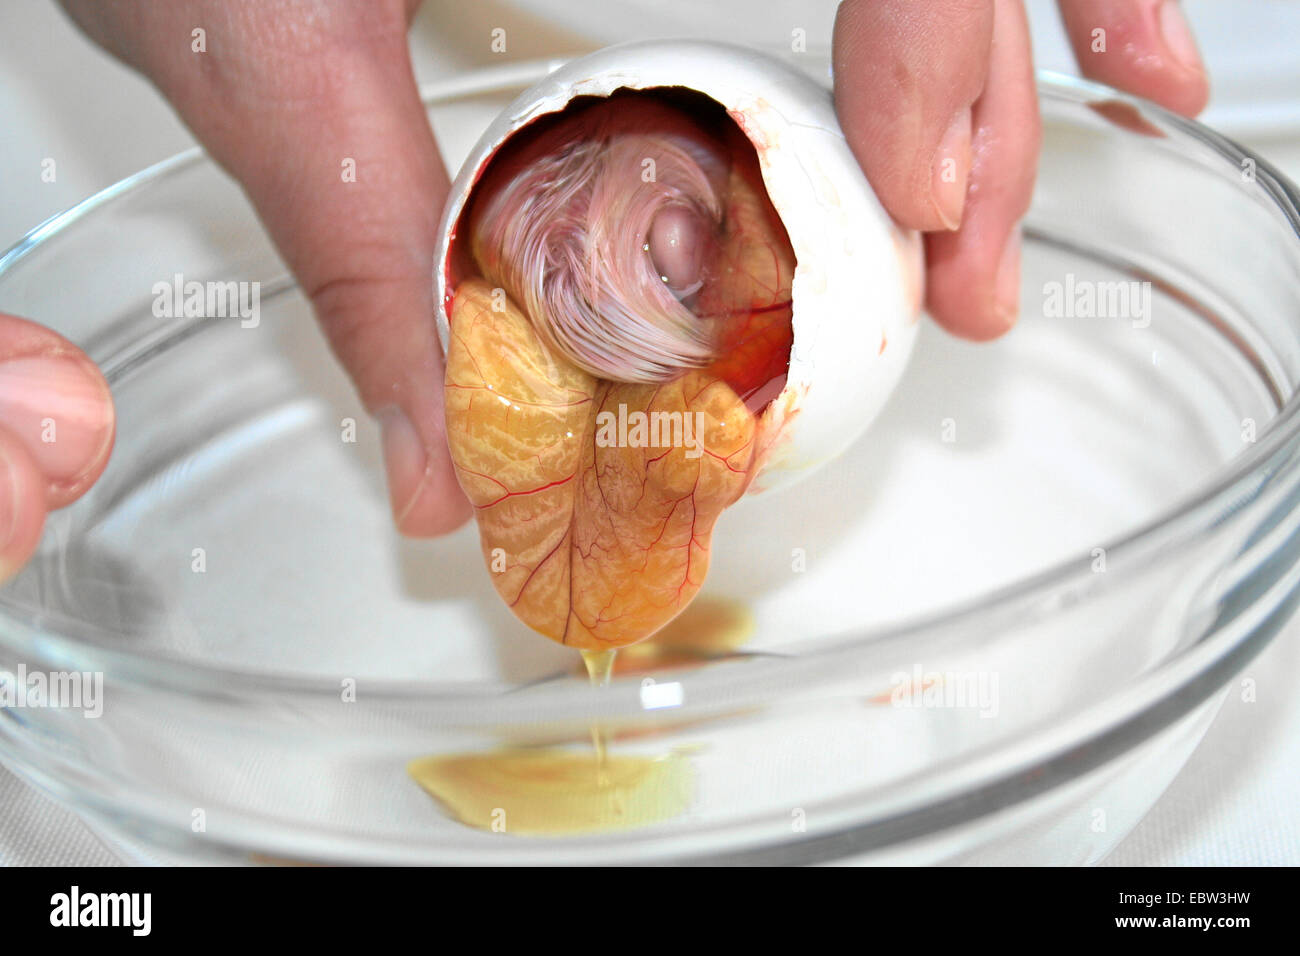 content of a fertilized duck's egg called balut, being eaten in the Far East as delicacy and supposed aphrodisiac, is poured into a glass bowl Stock Photo